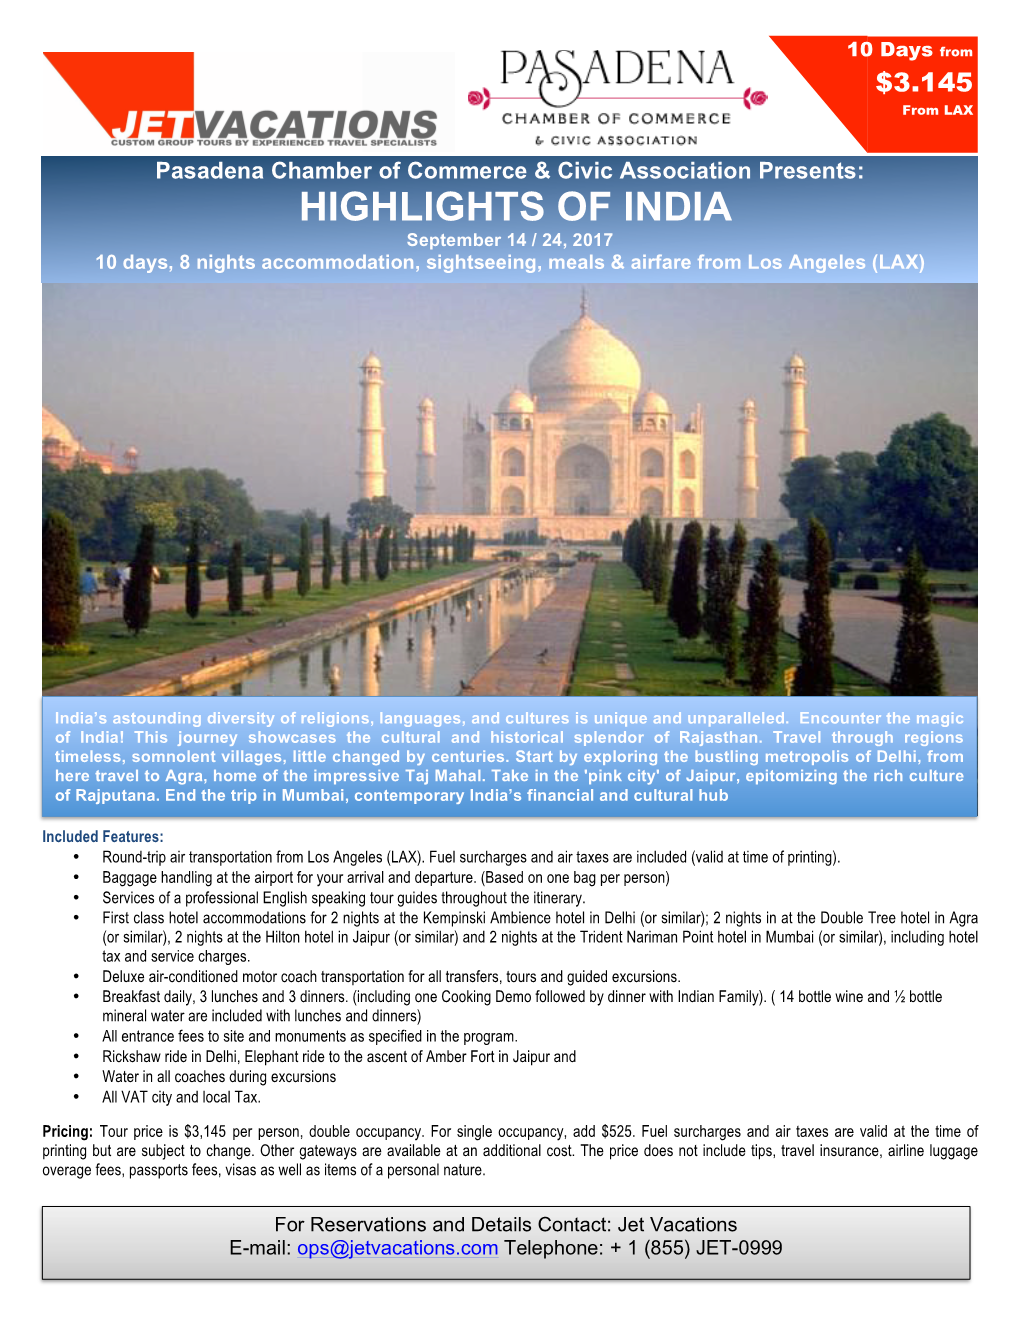 HIGHLIGHTS of INDIA September 14 / 24, 2017 10 Days, 8 Nights Accommodation, Sightseeing, Meals & Airfare from Los Angeles (LAX)